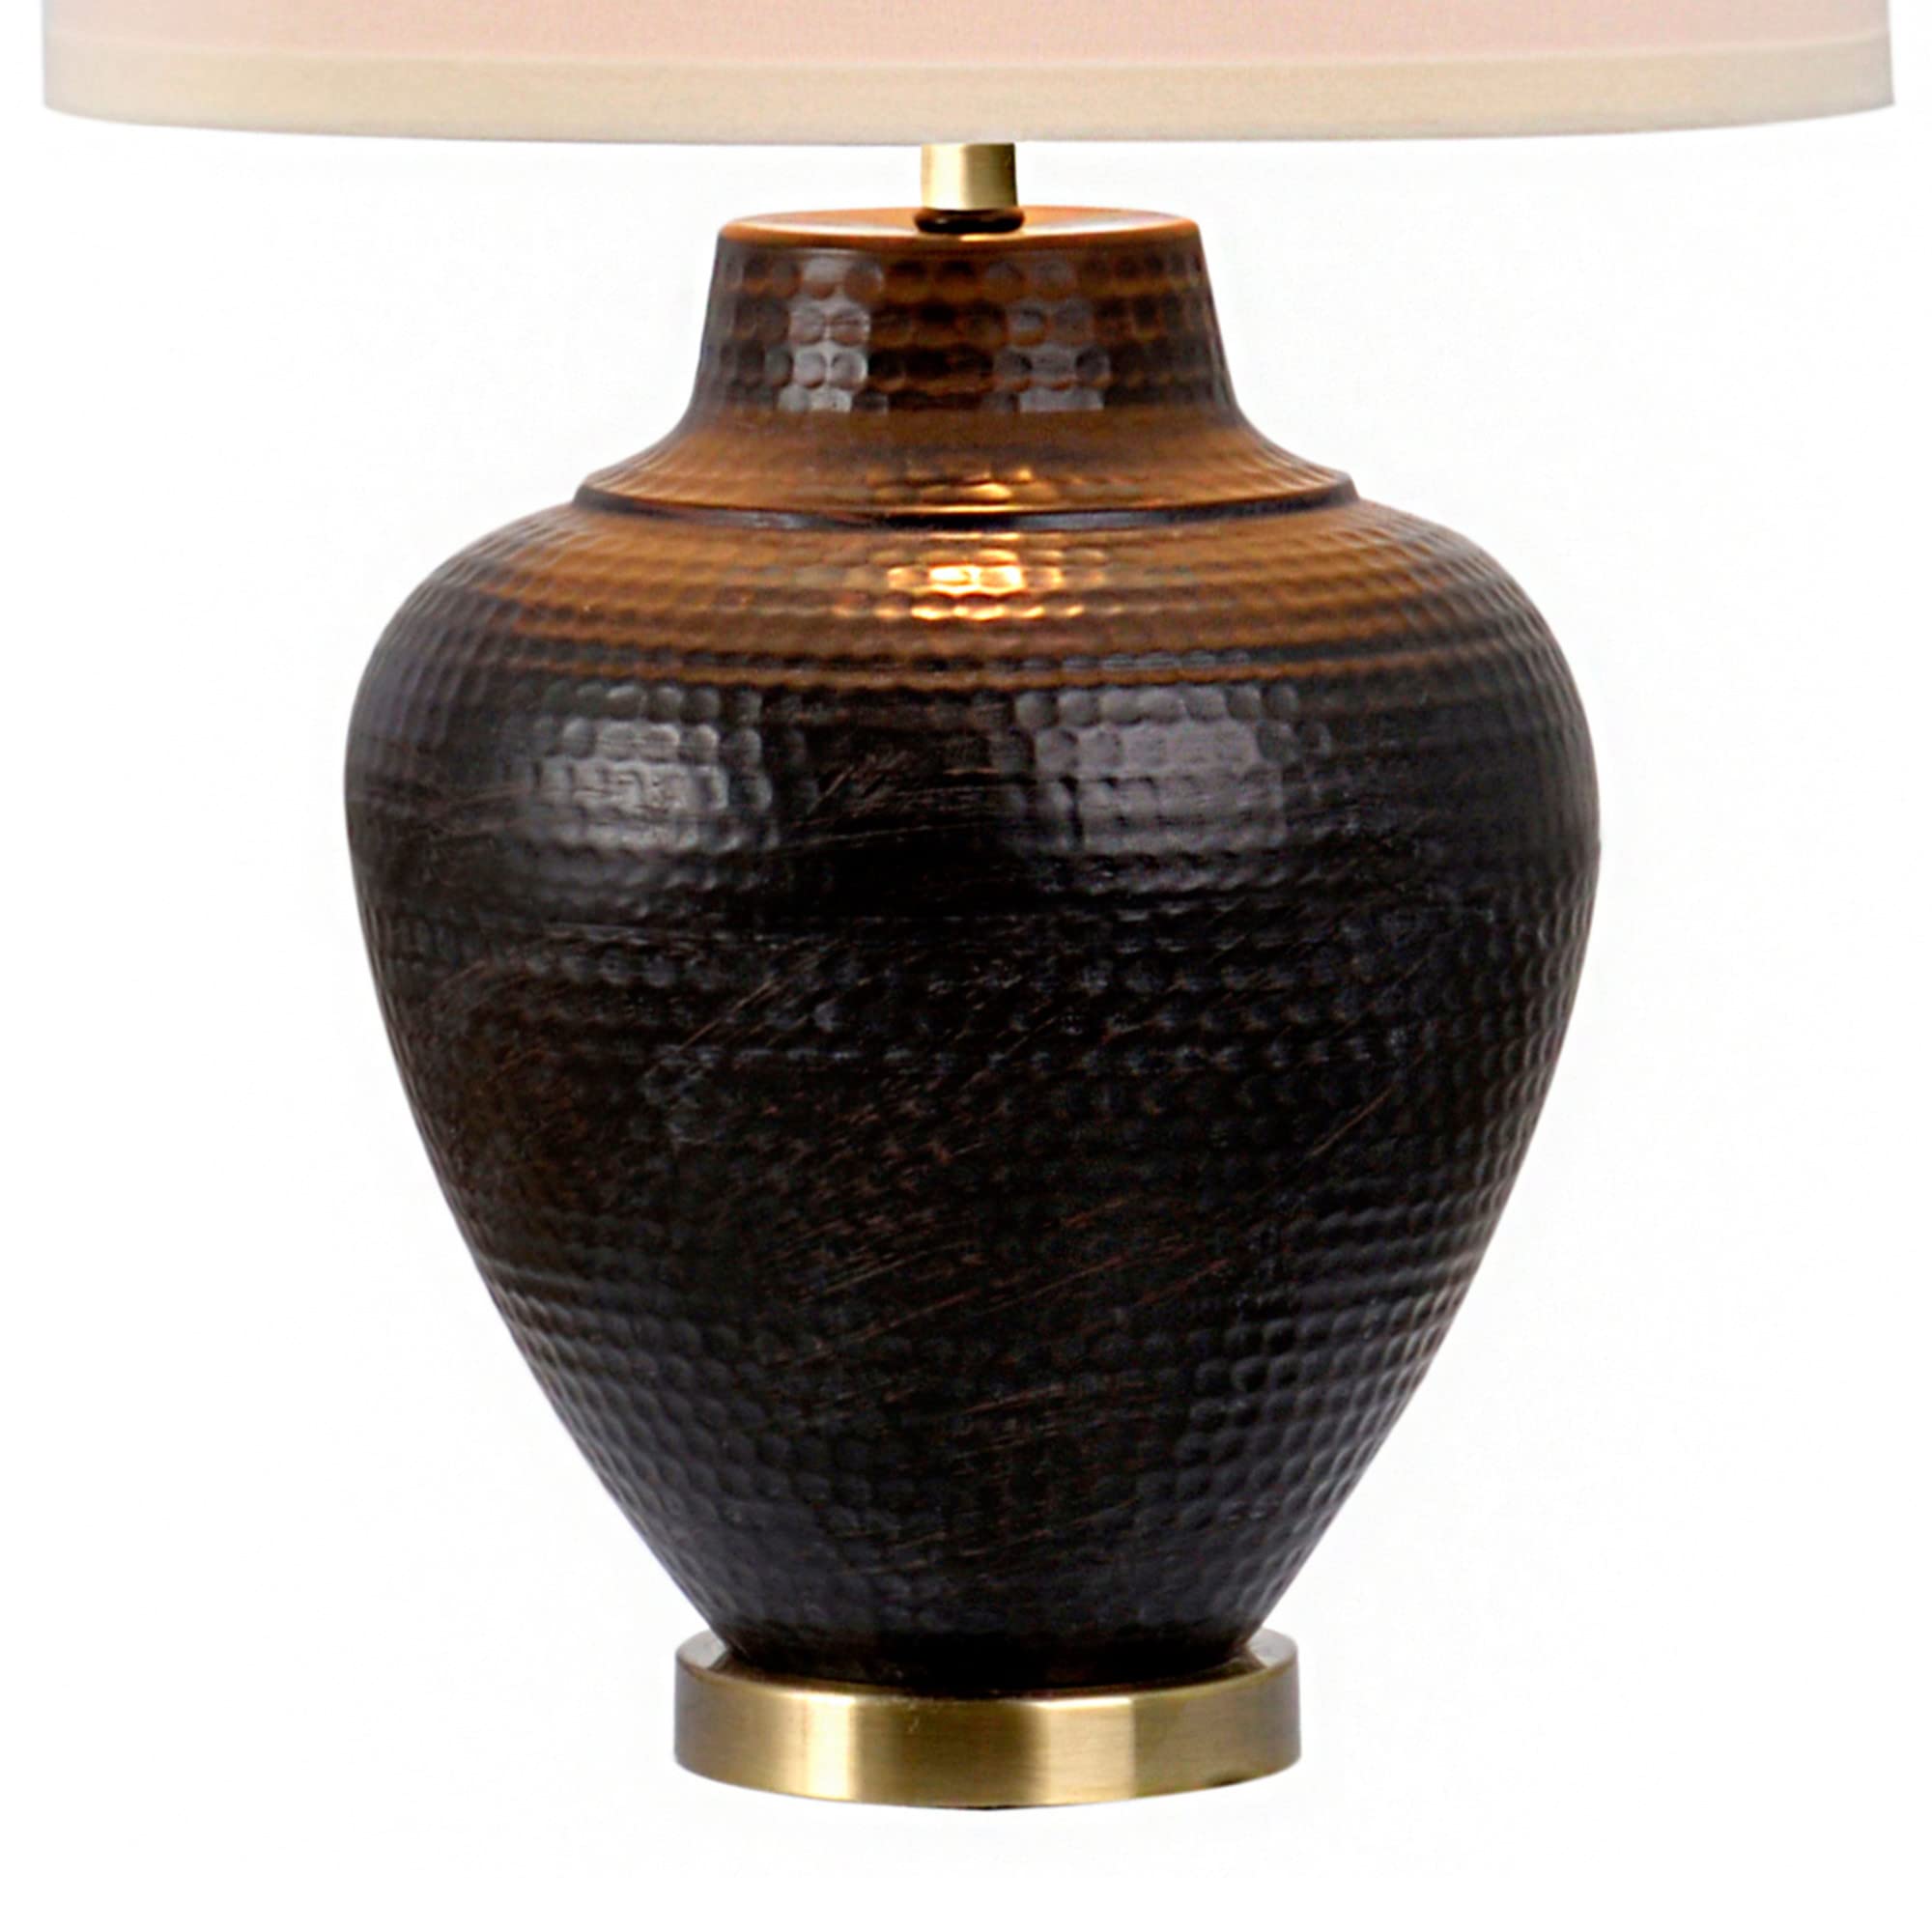 Catalina 19954-000 Modern Hammered Metal Table Lamp with Antique Brass Accents, 27.25, Oil Rubbed Bronze